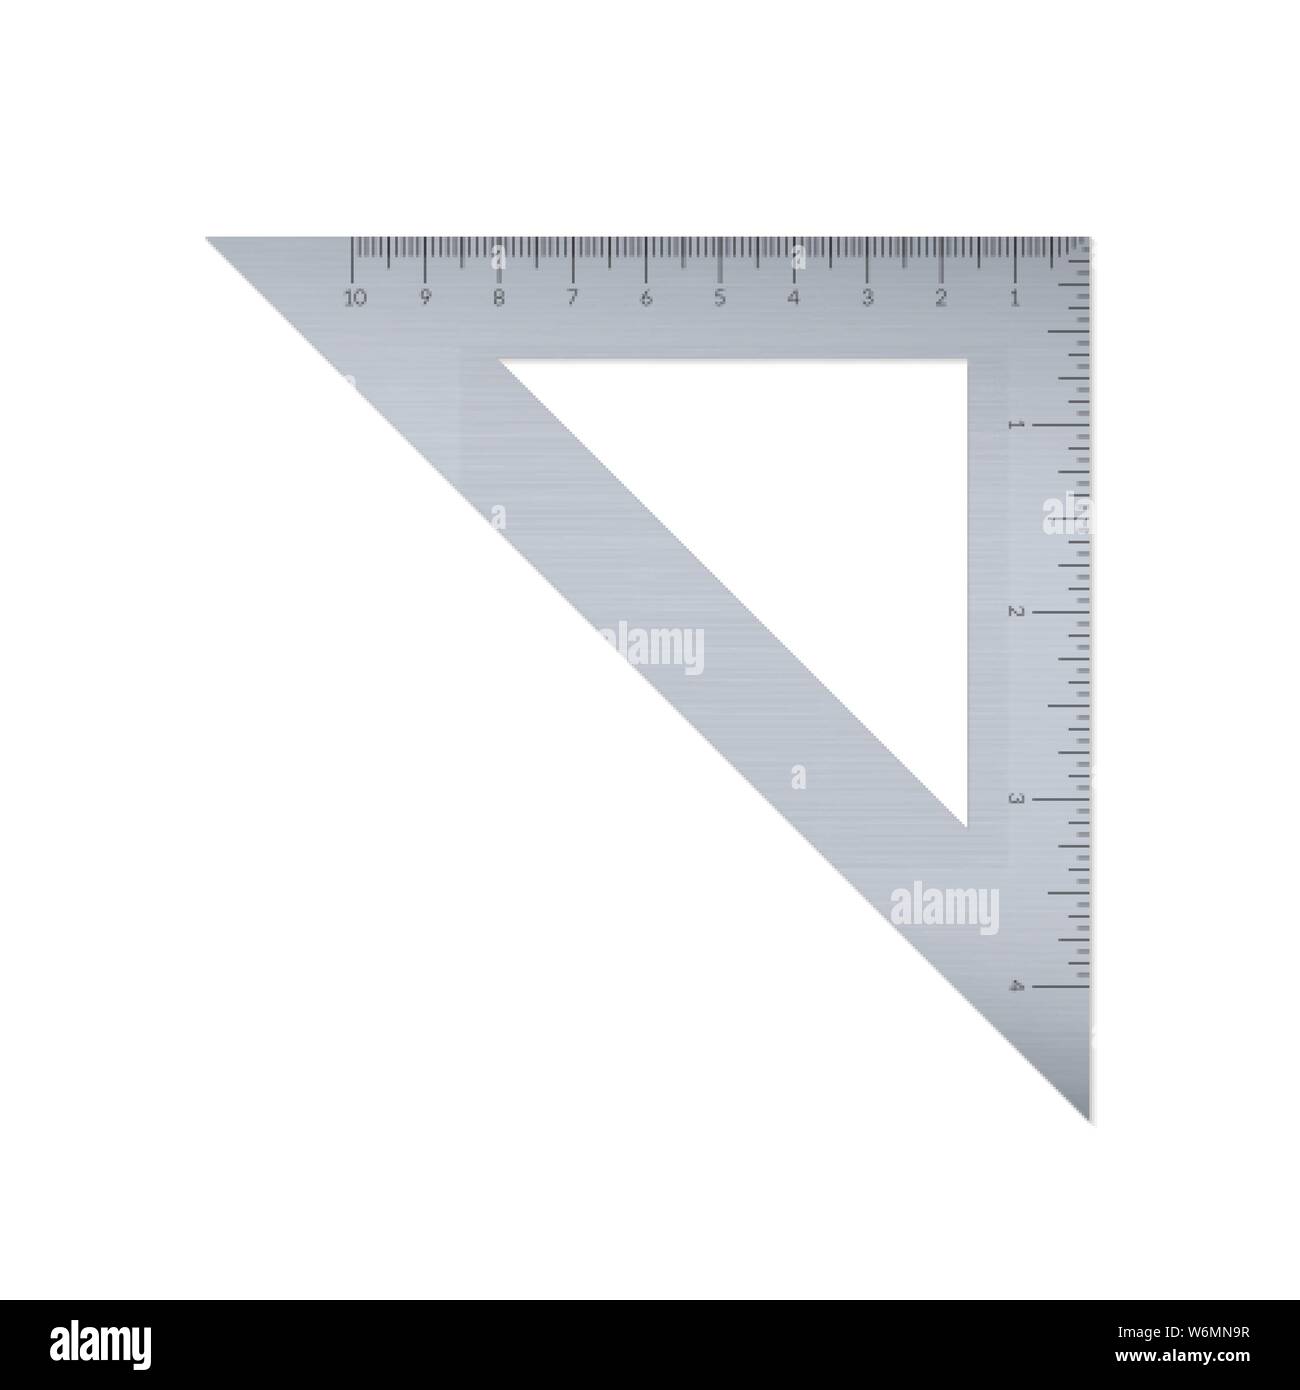 Steel isosceles triangle with metric and imperial units ruler scale Stock Vector